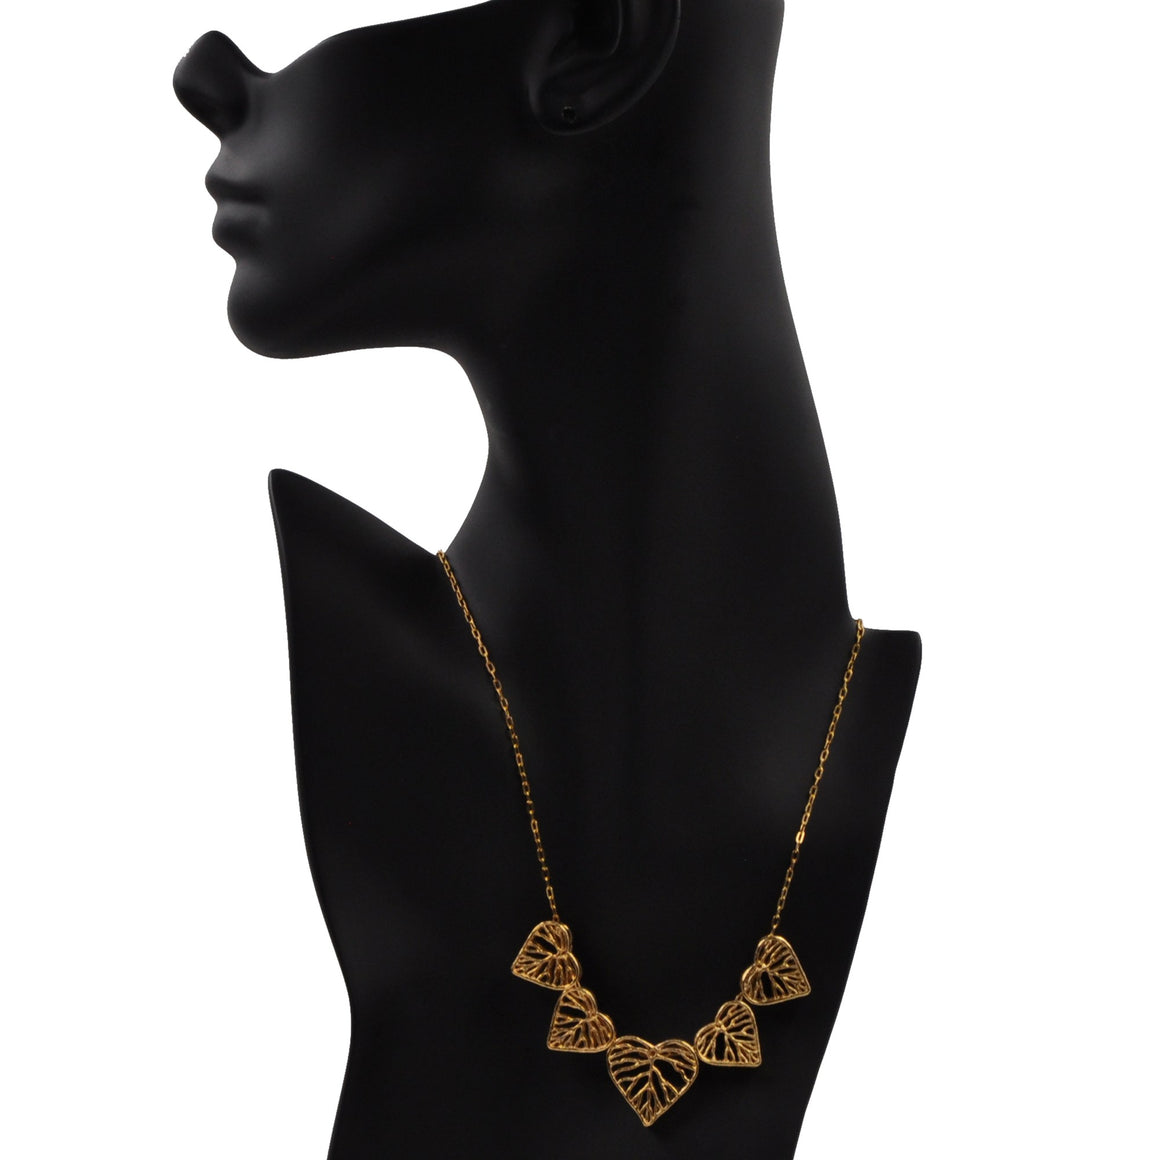 Heart Leaf Dimensional Necklace (Five Hearts) - 24K Gold Plated